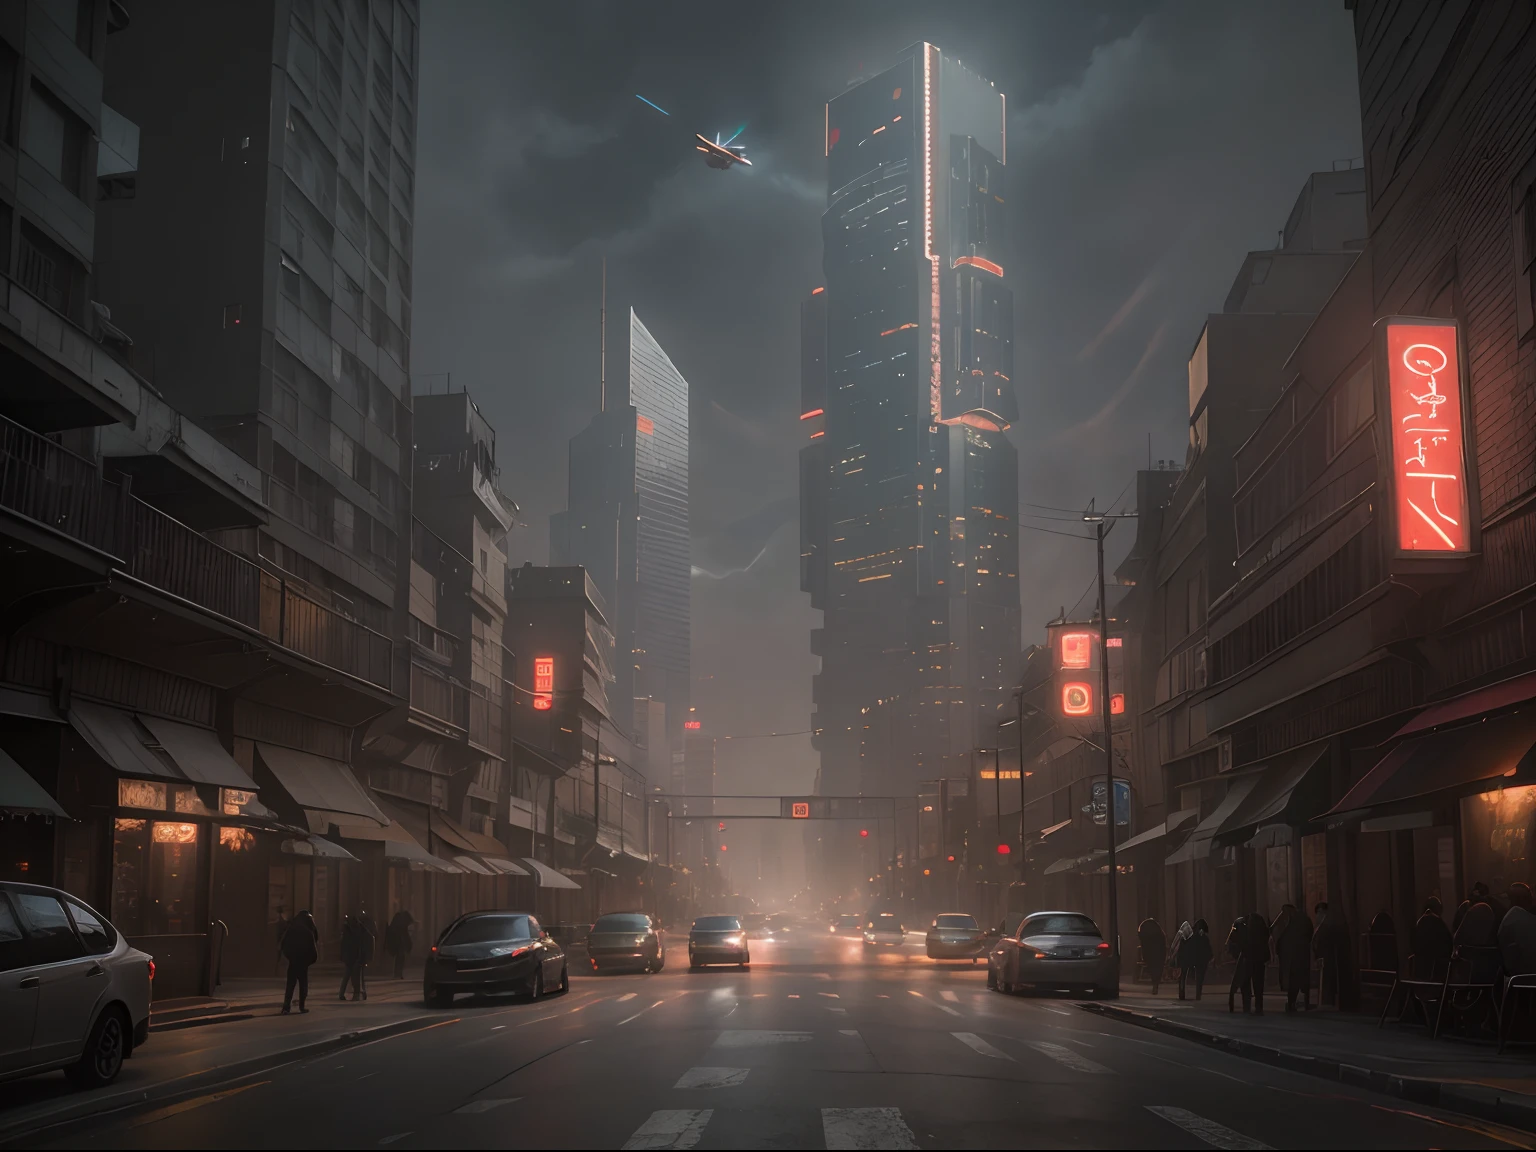 Cyberpunk cityscape street scene with towering skyscrapers, glowing neon signs and LED lights, traffic and ((flying cars)) in the sky, dark atmosphere, cinematic lighting.